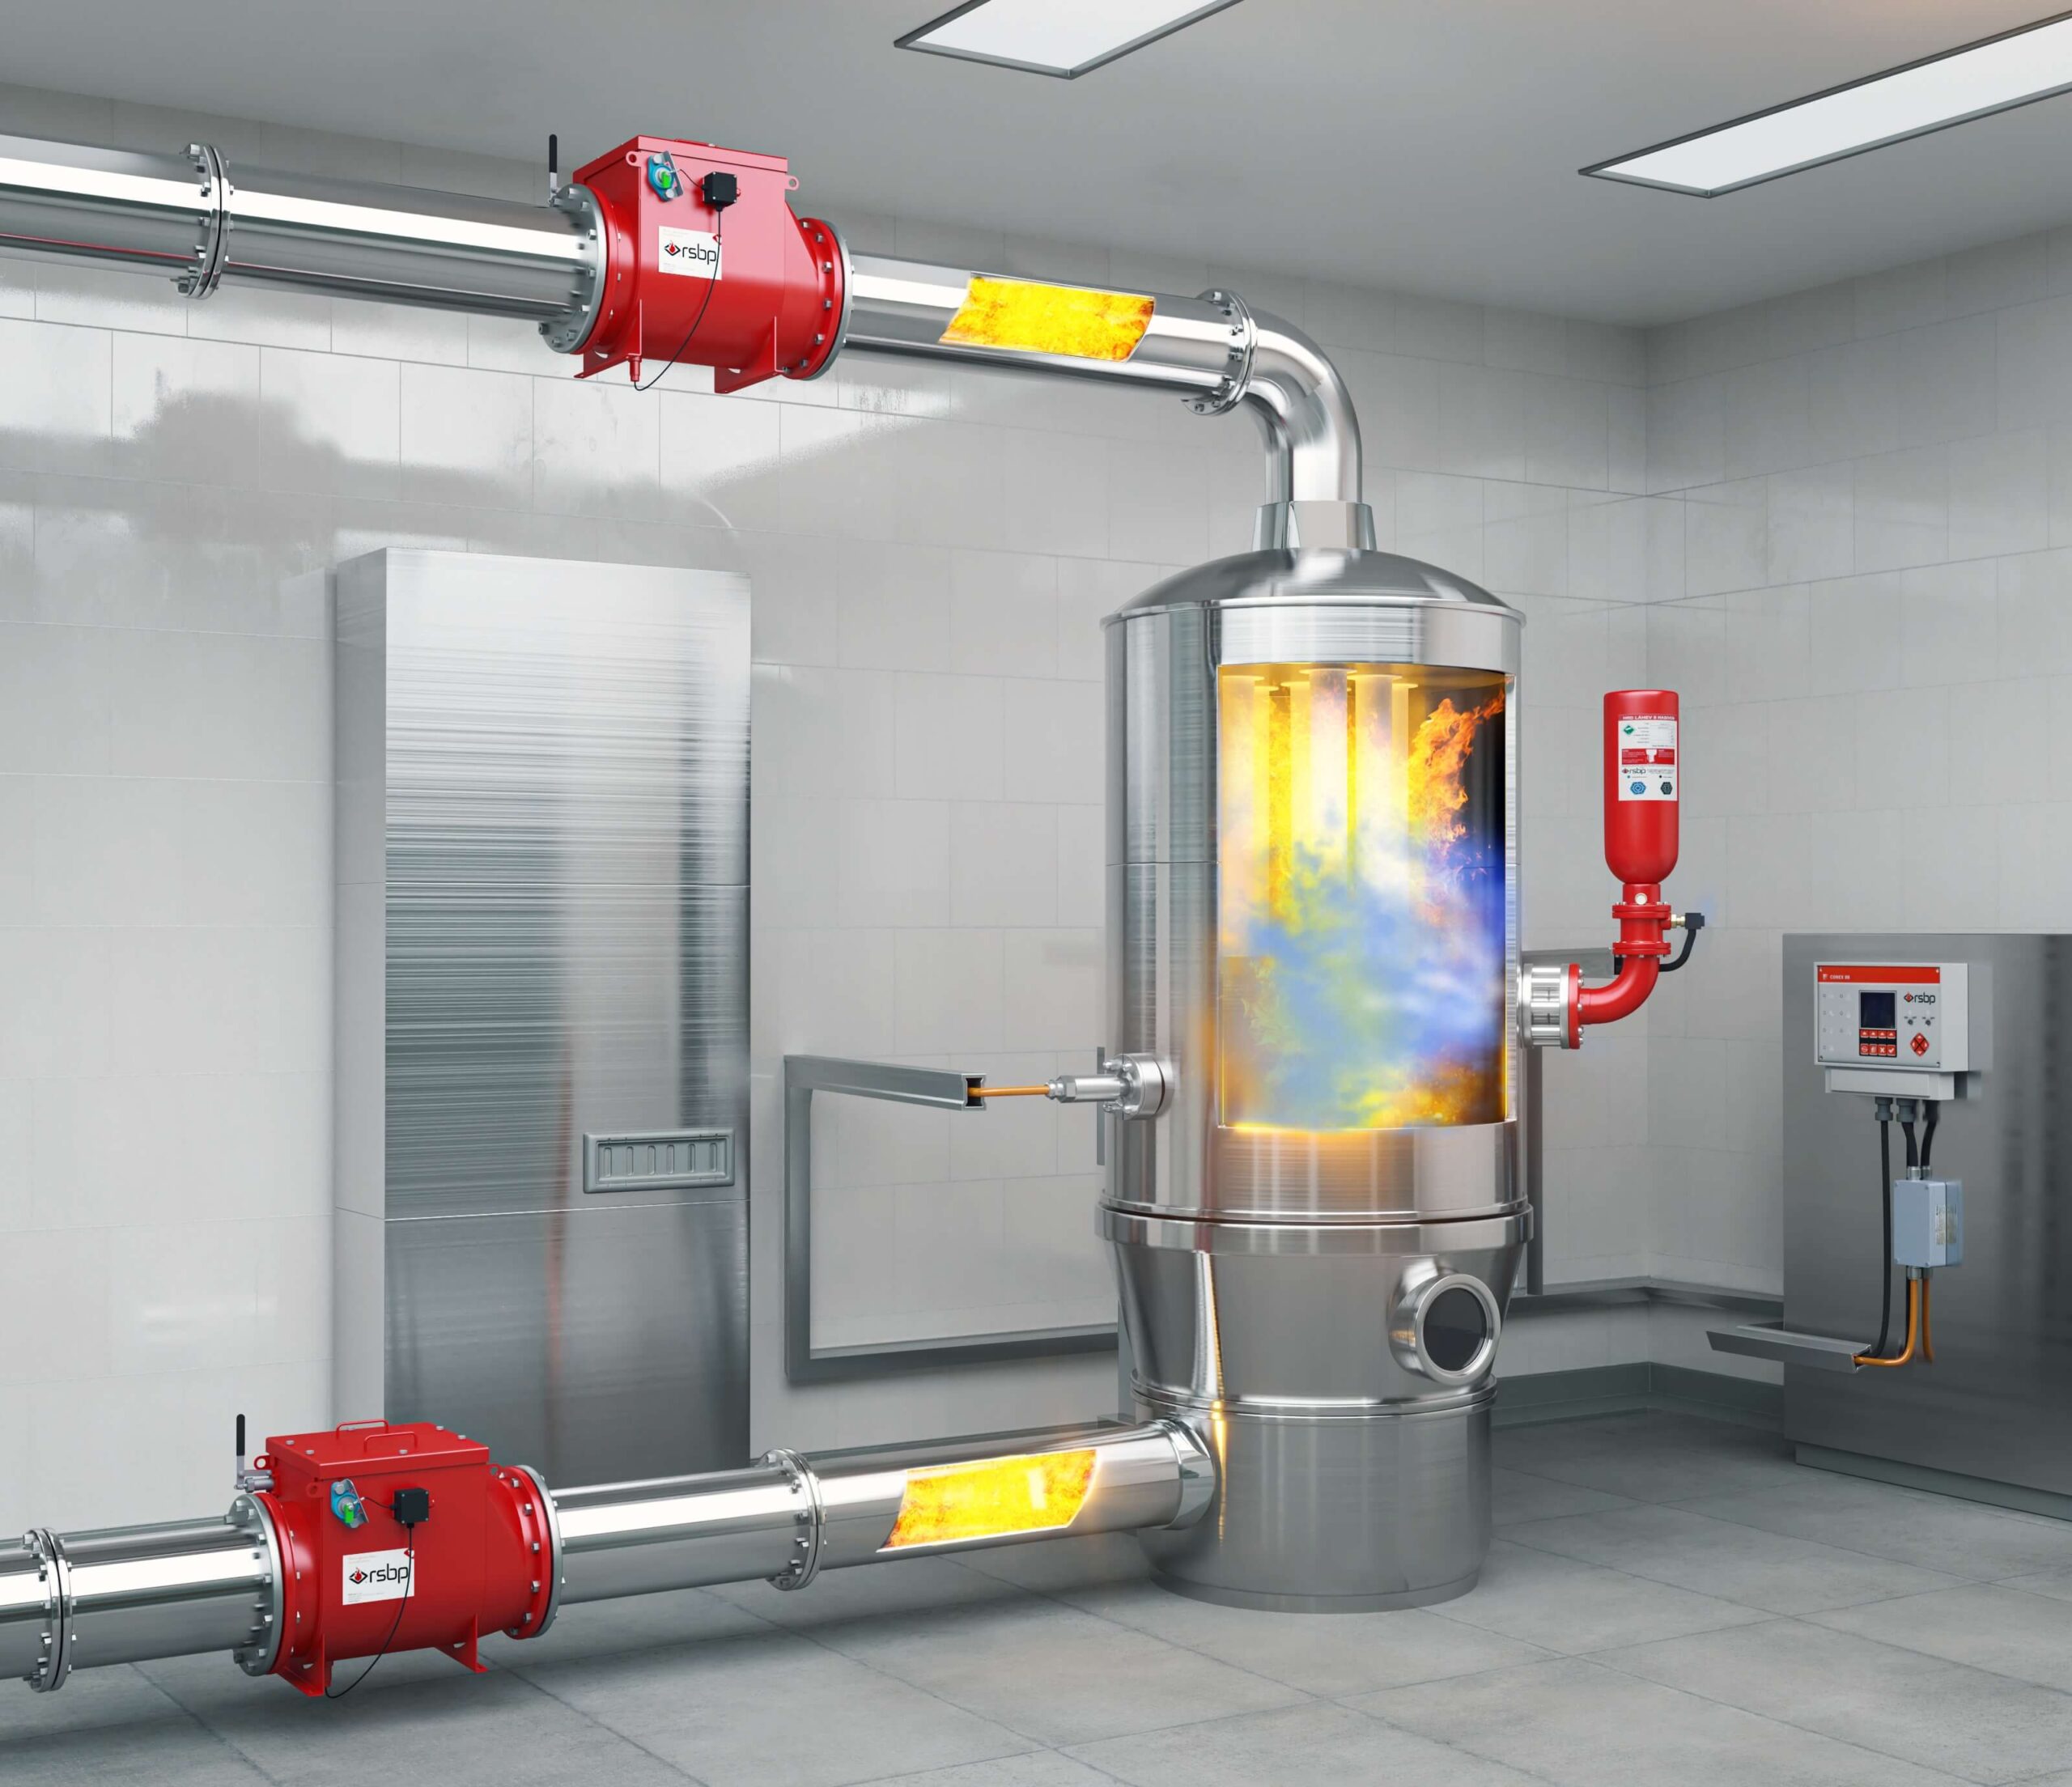 Explosion protection for dryers